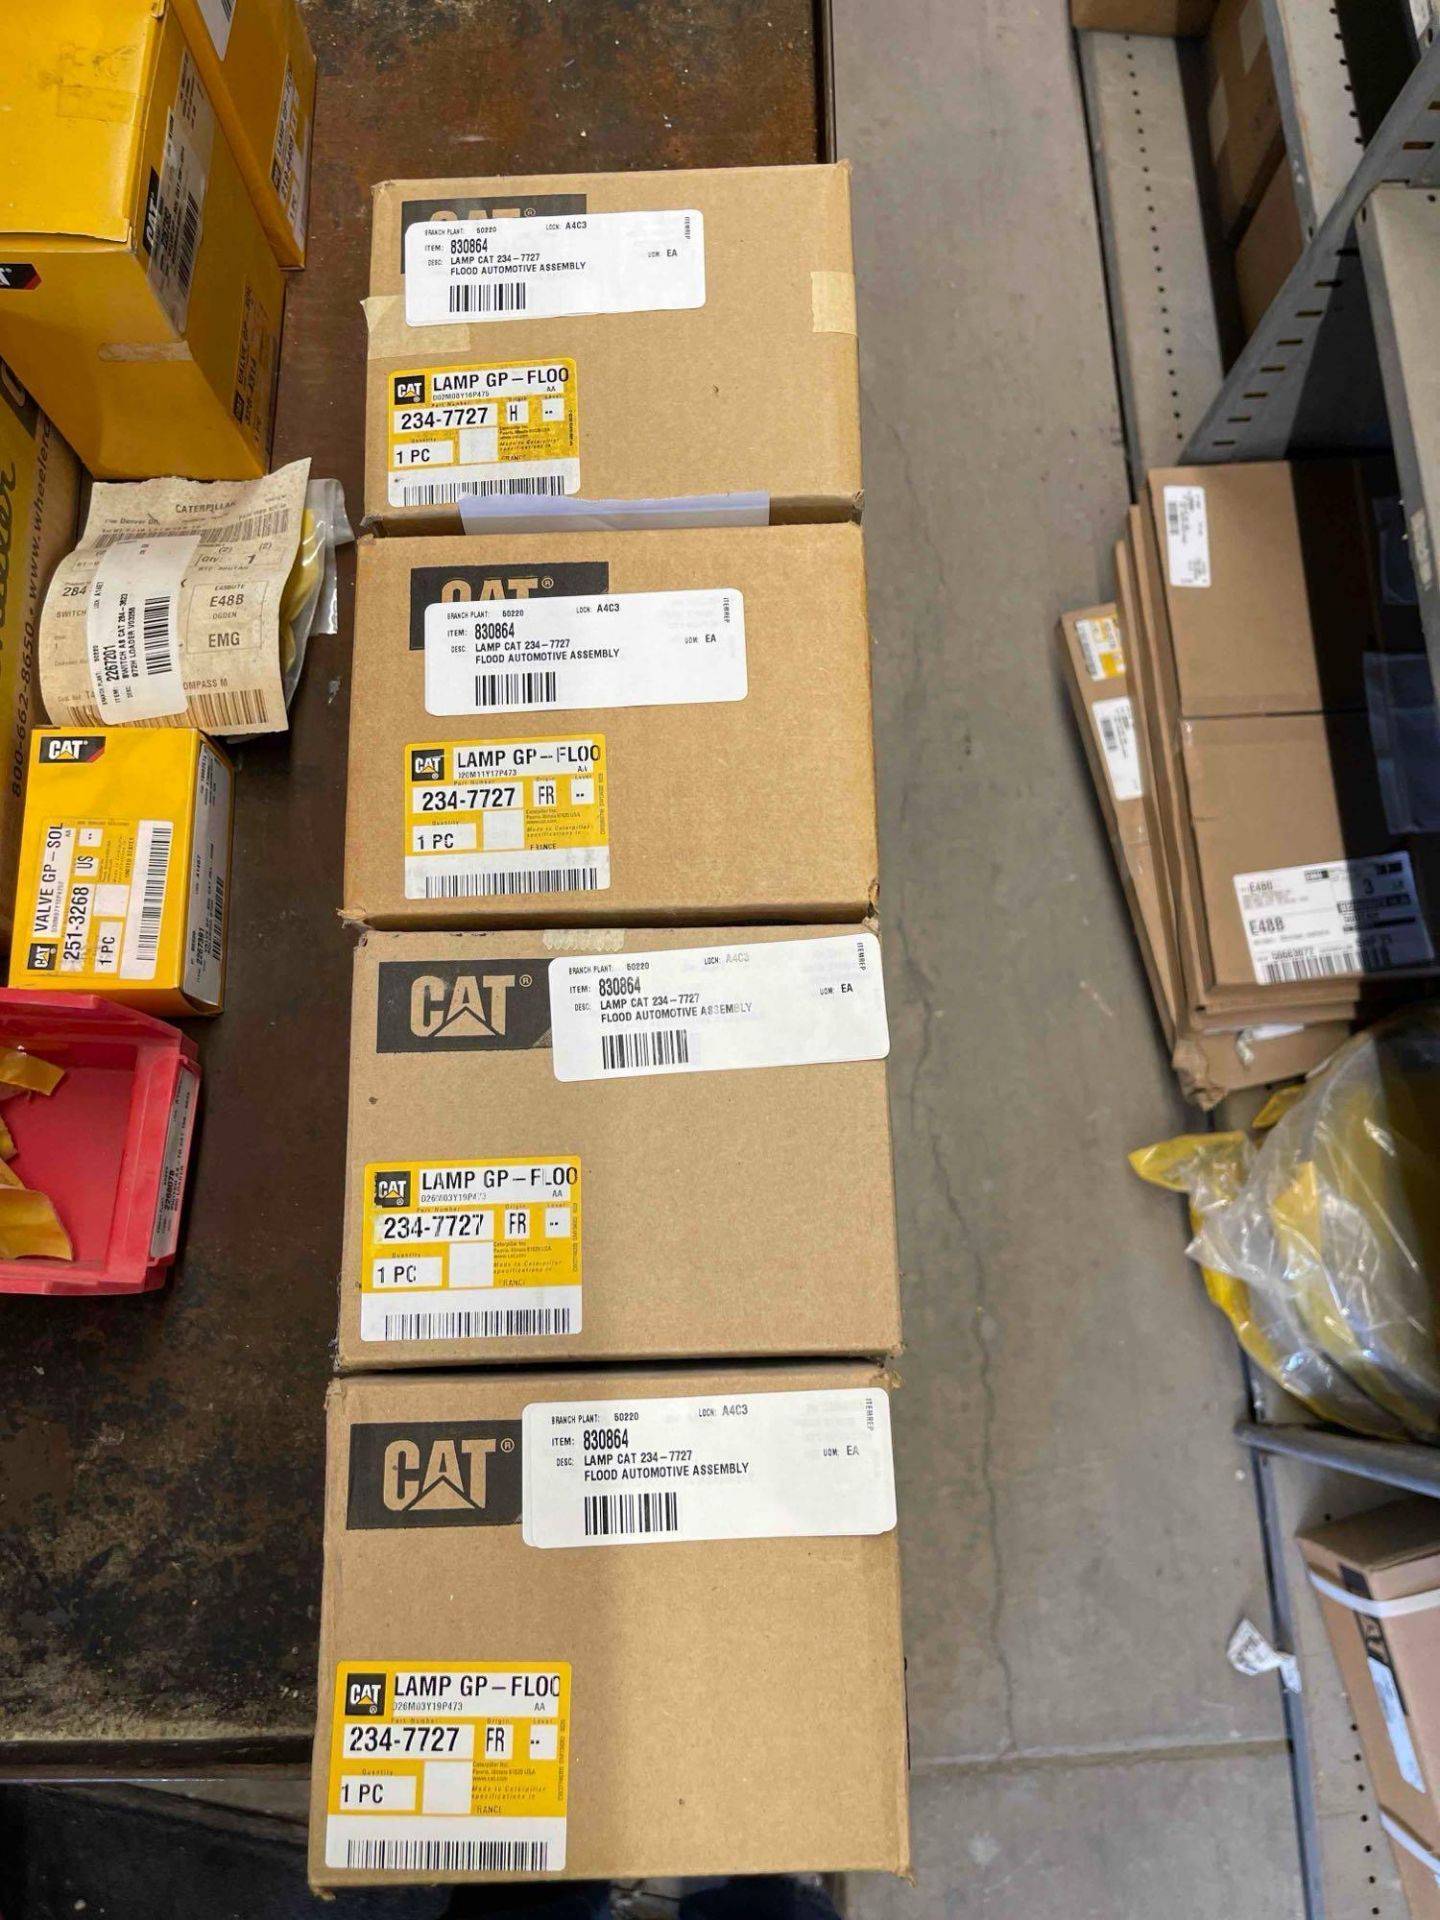 CAT Flood lamps, Circuit Breakers, Gaskets, CAT seats New in Box - Image 23 of 36